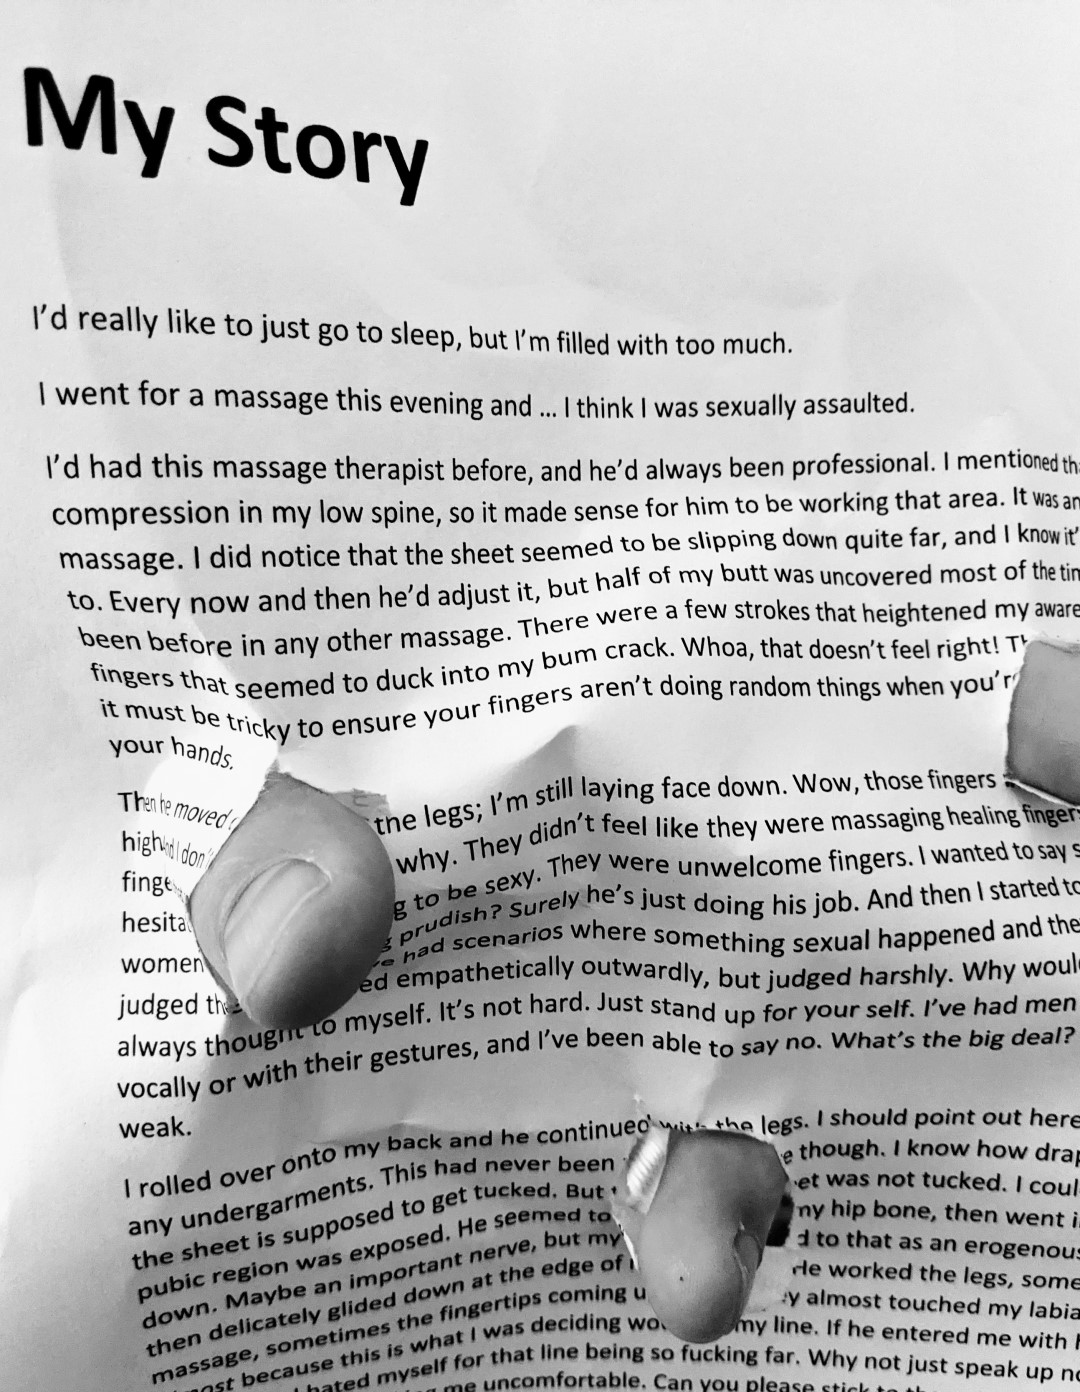 Fingers poking through a page where my story is written